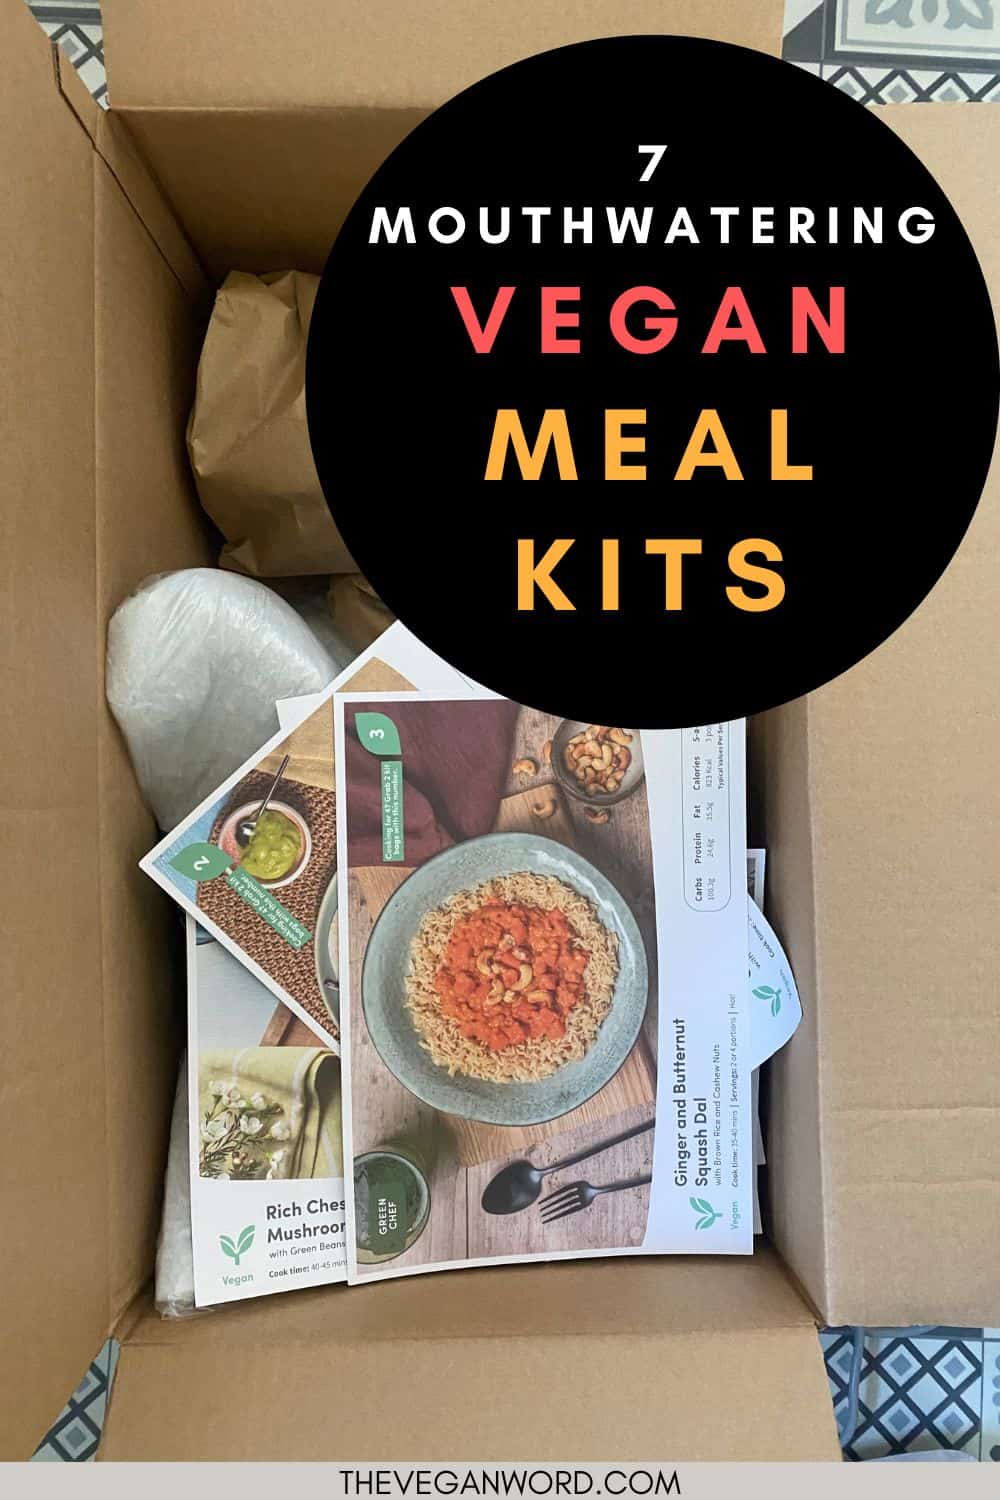 Pinterest image showing a meal kit box with recipe cards on top and text that reads "7 mouthwatering vegan meal kits"